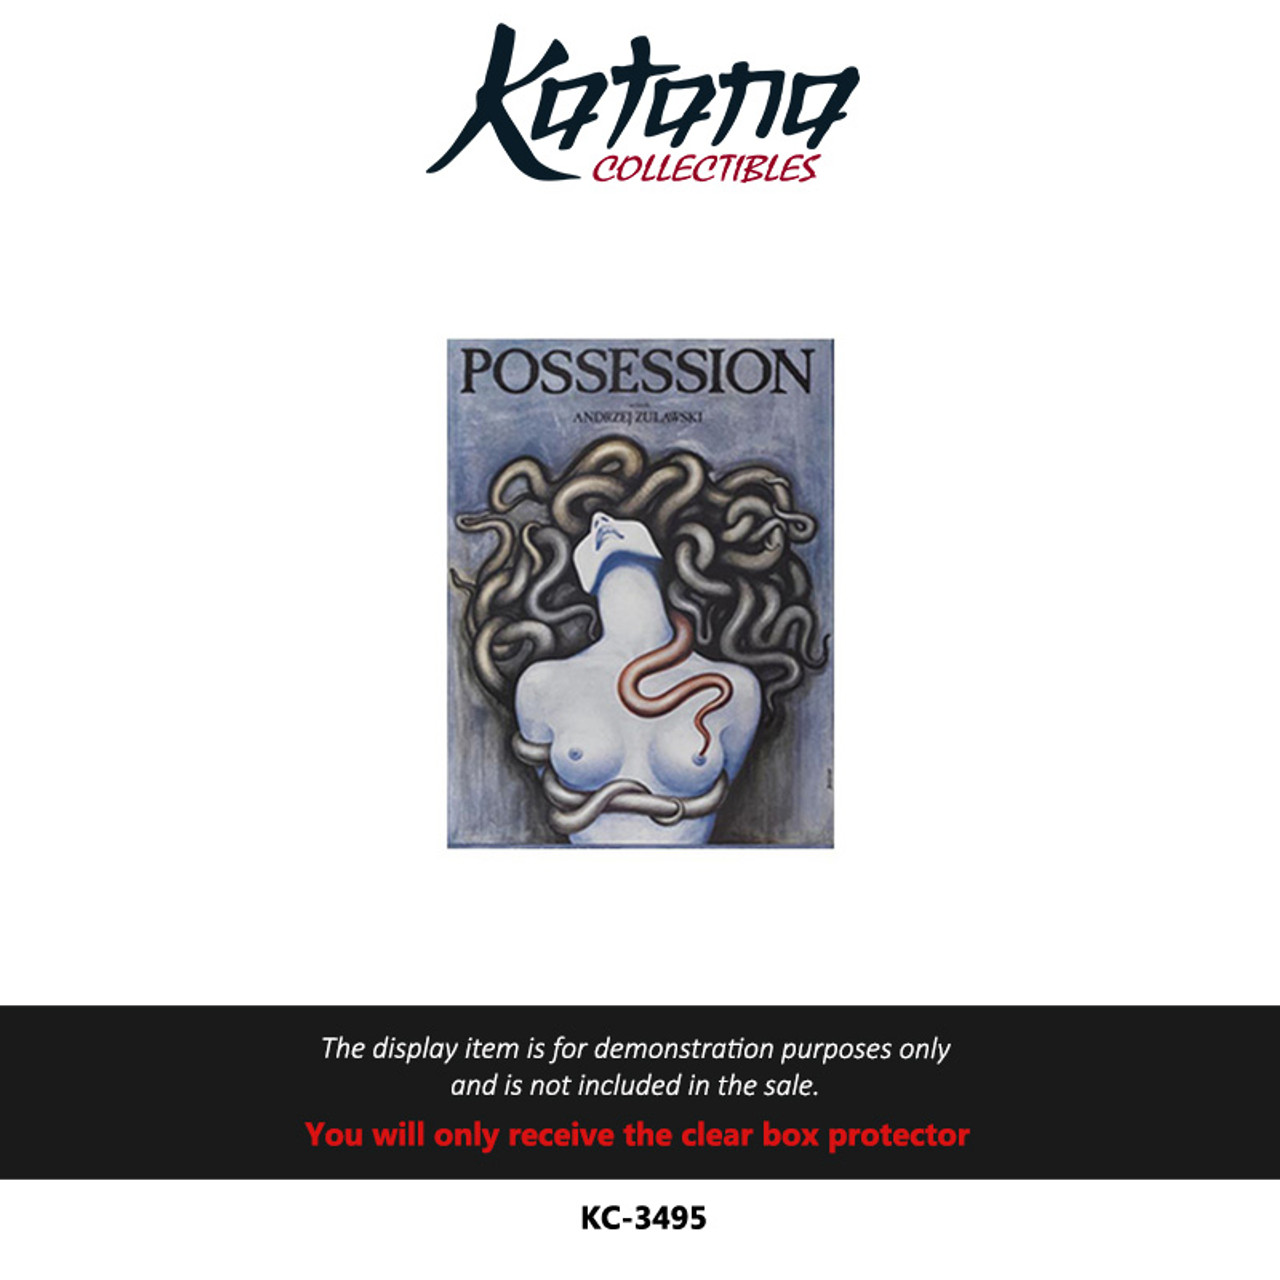 Katana Collectibles Protector For Possession (1981) Special Edition DIGIPAK With Hardcover Slipcase